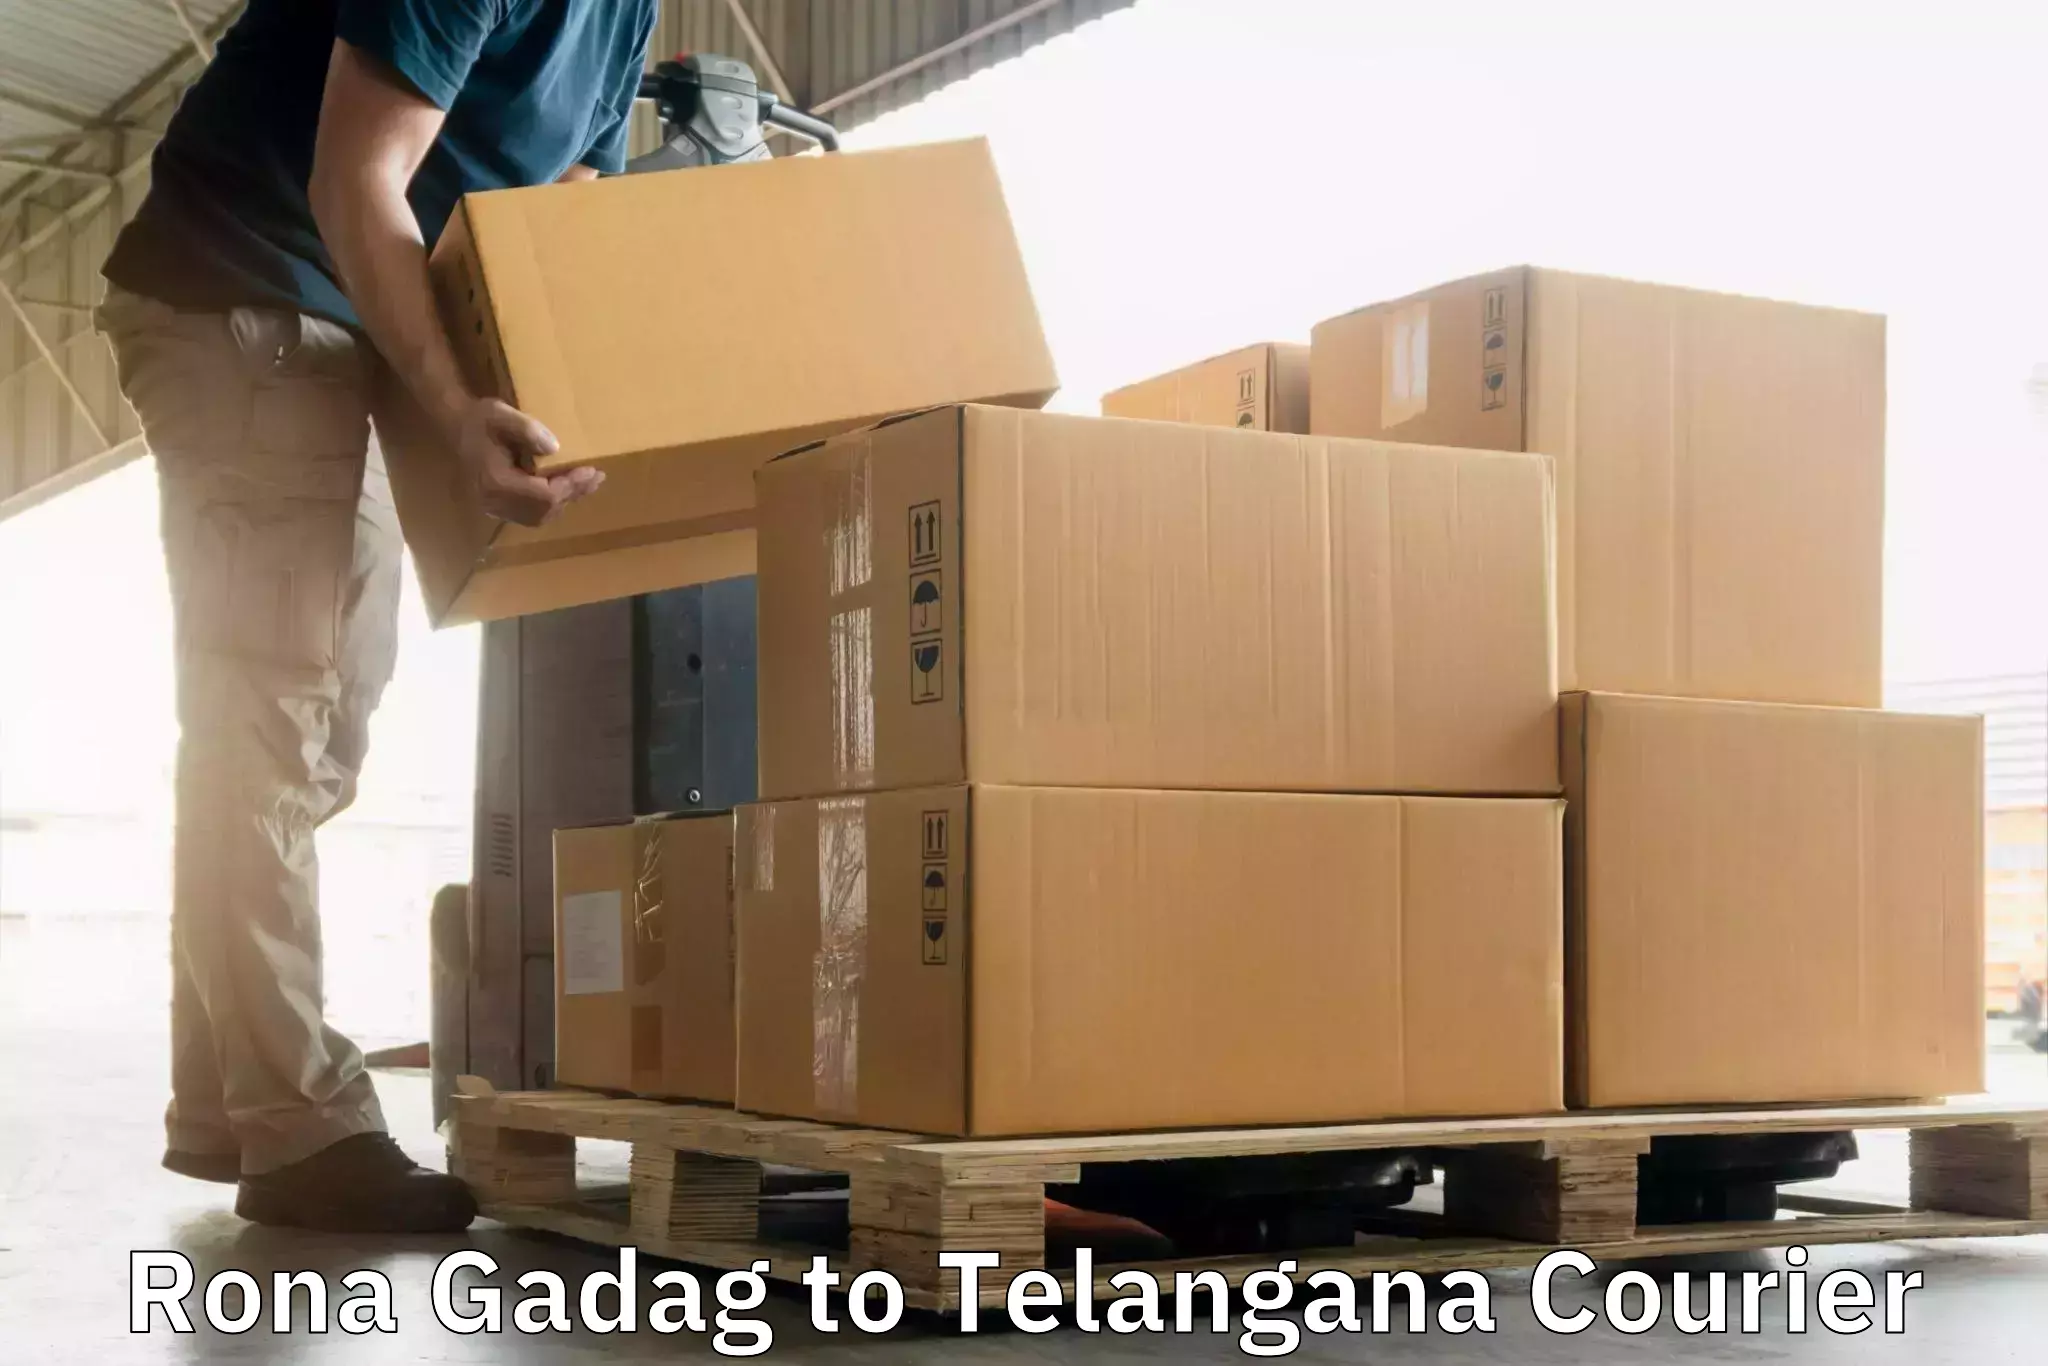 Reliable parcel services in Rona Gadag to Alair